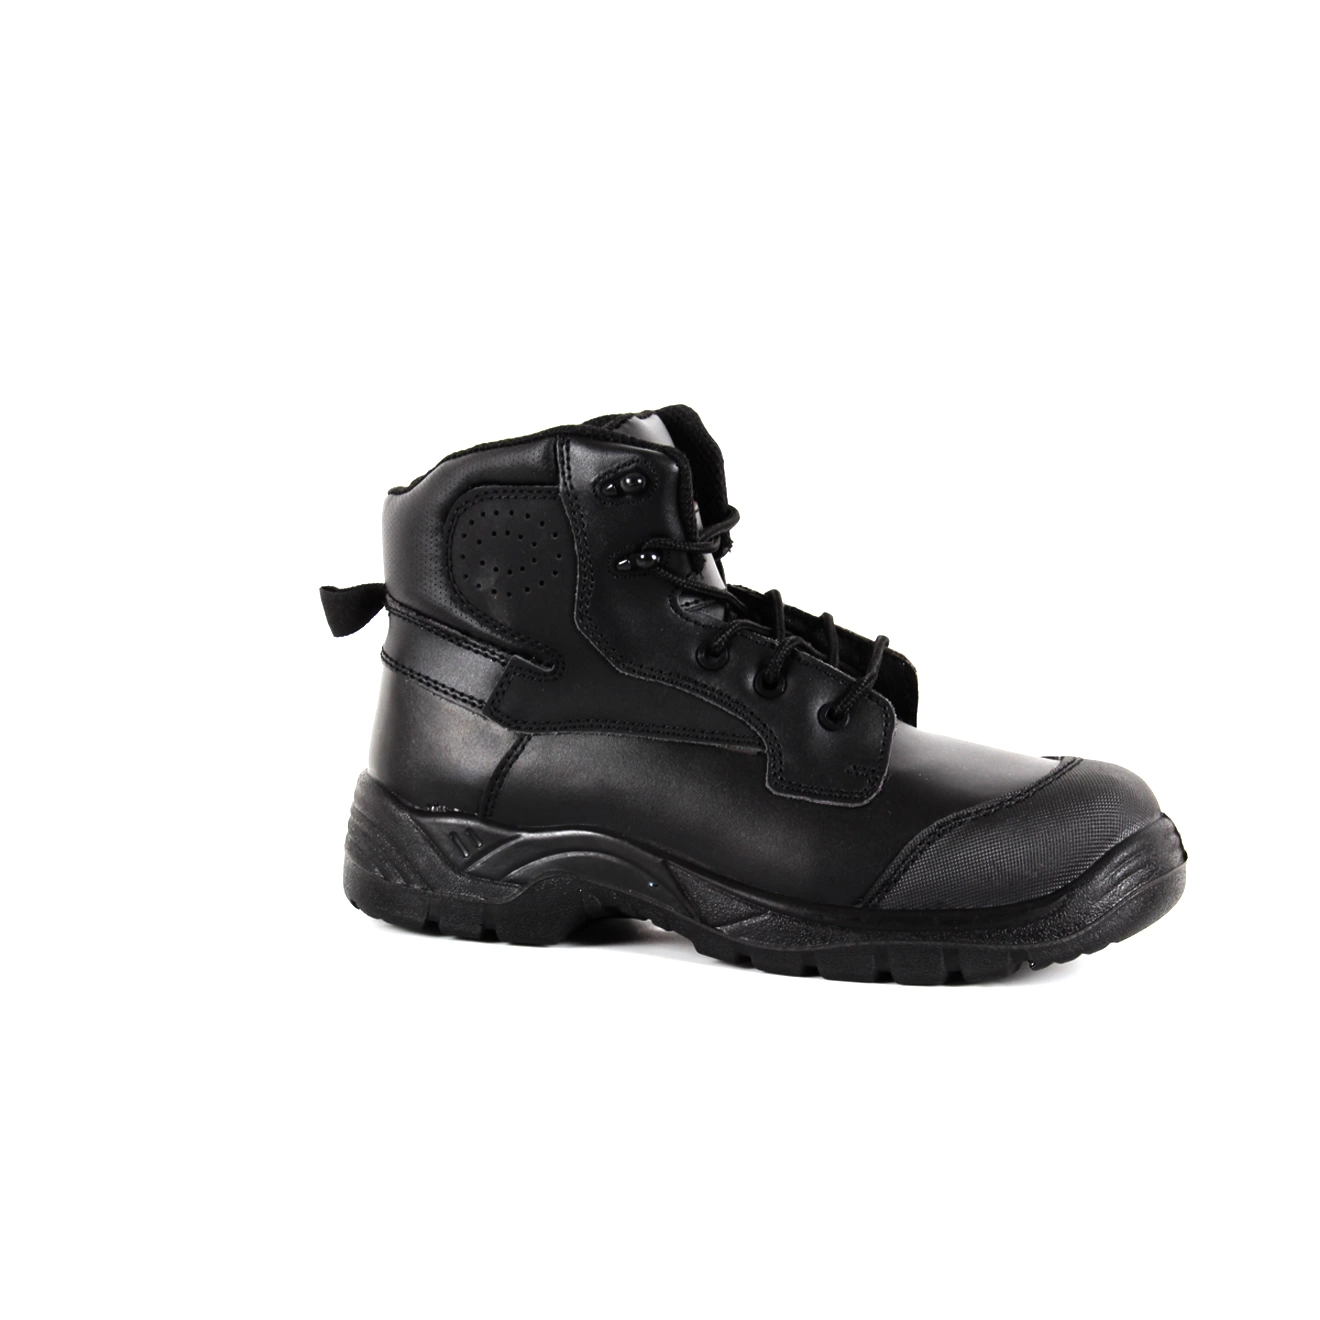 Blackrock Black Sovereign Safety Boot with Non-Metallic Toe Cap and Midsole 